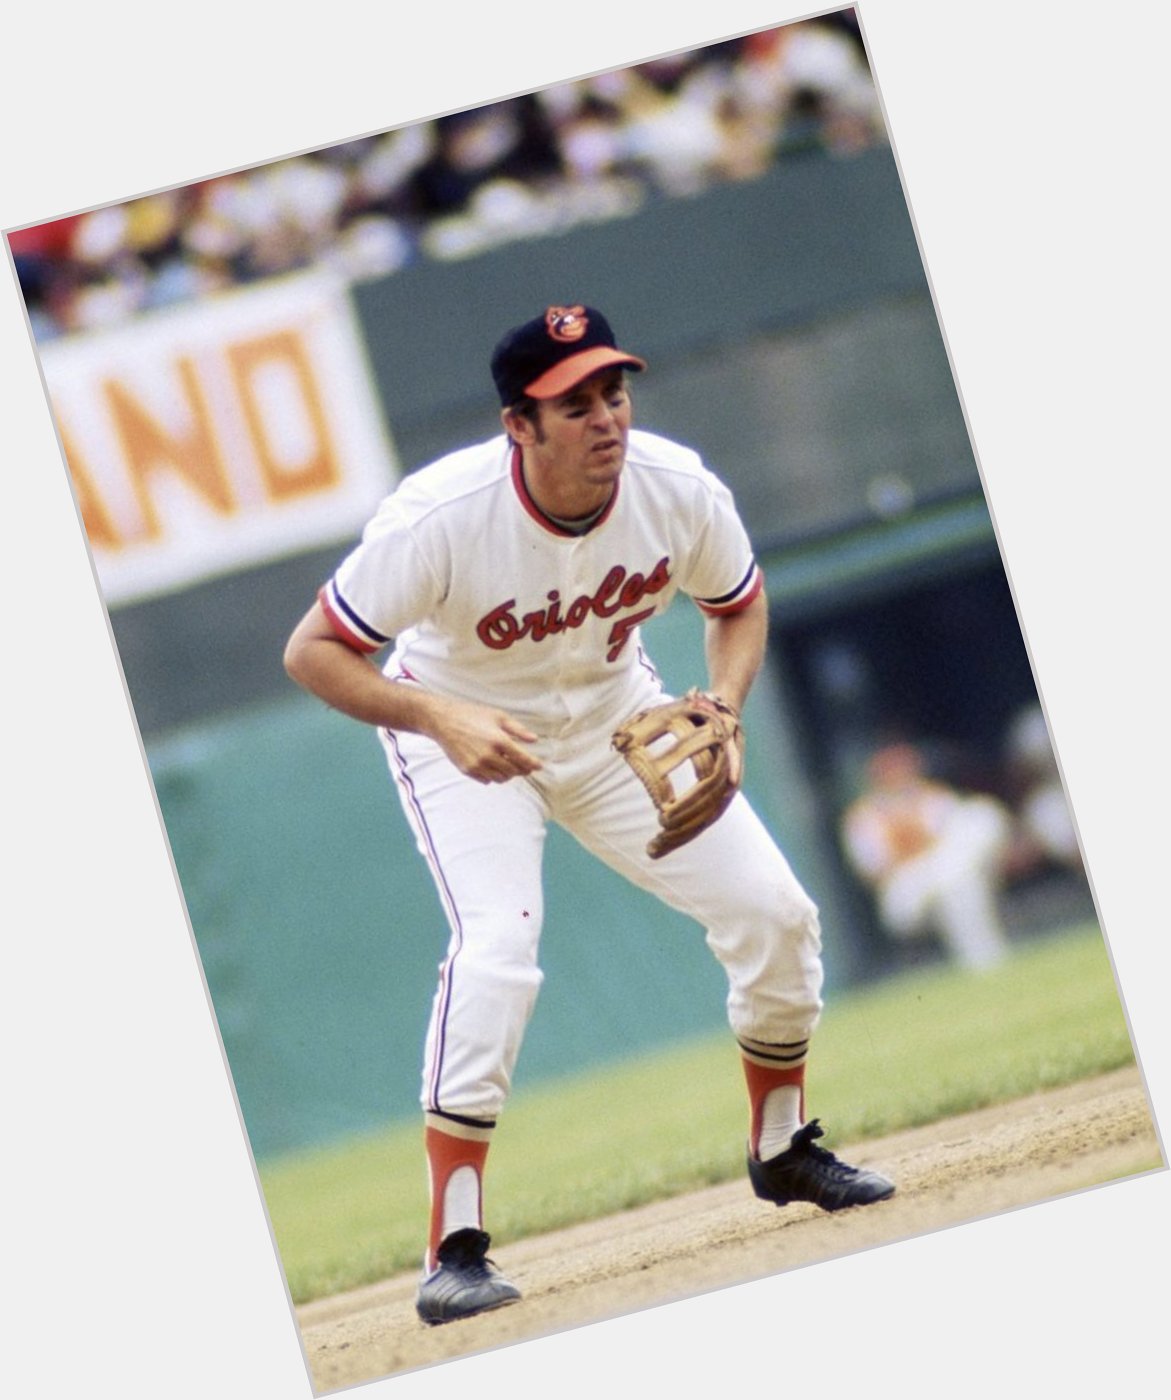 Happy birthday to one of my all time favorites growing up, Brooks Robinson 